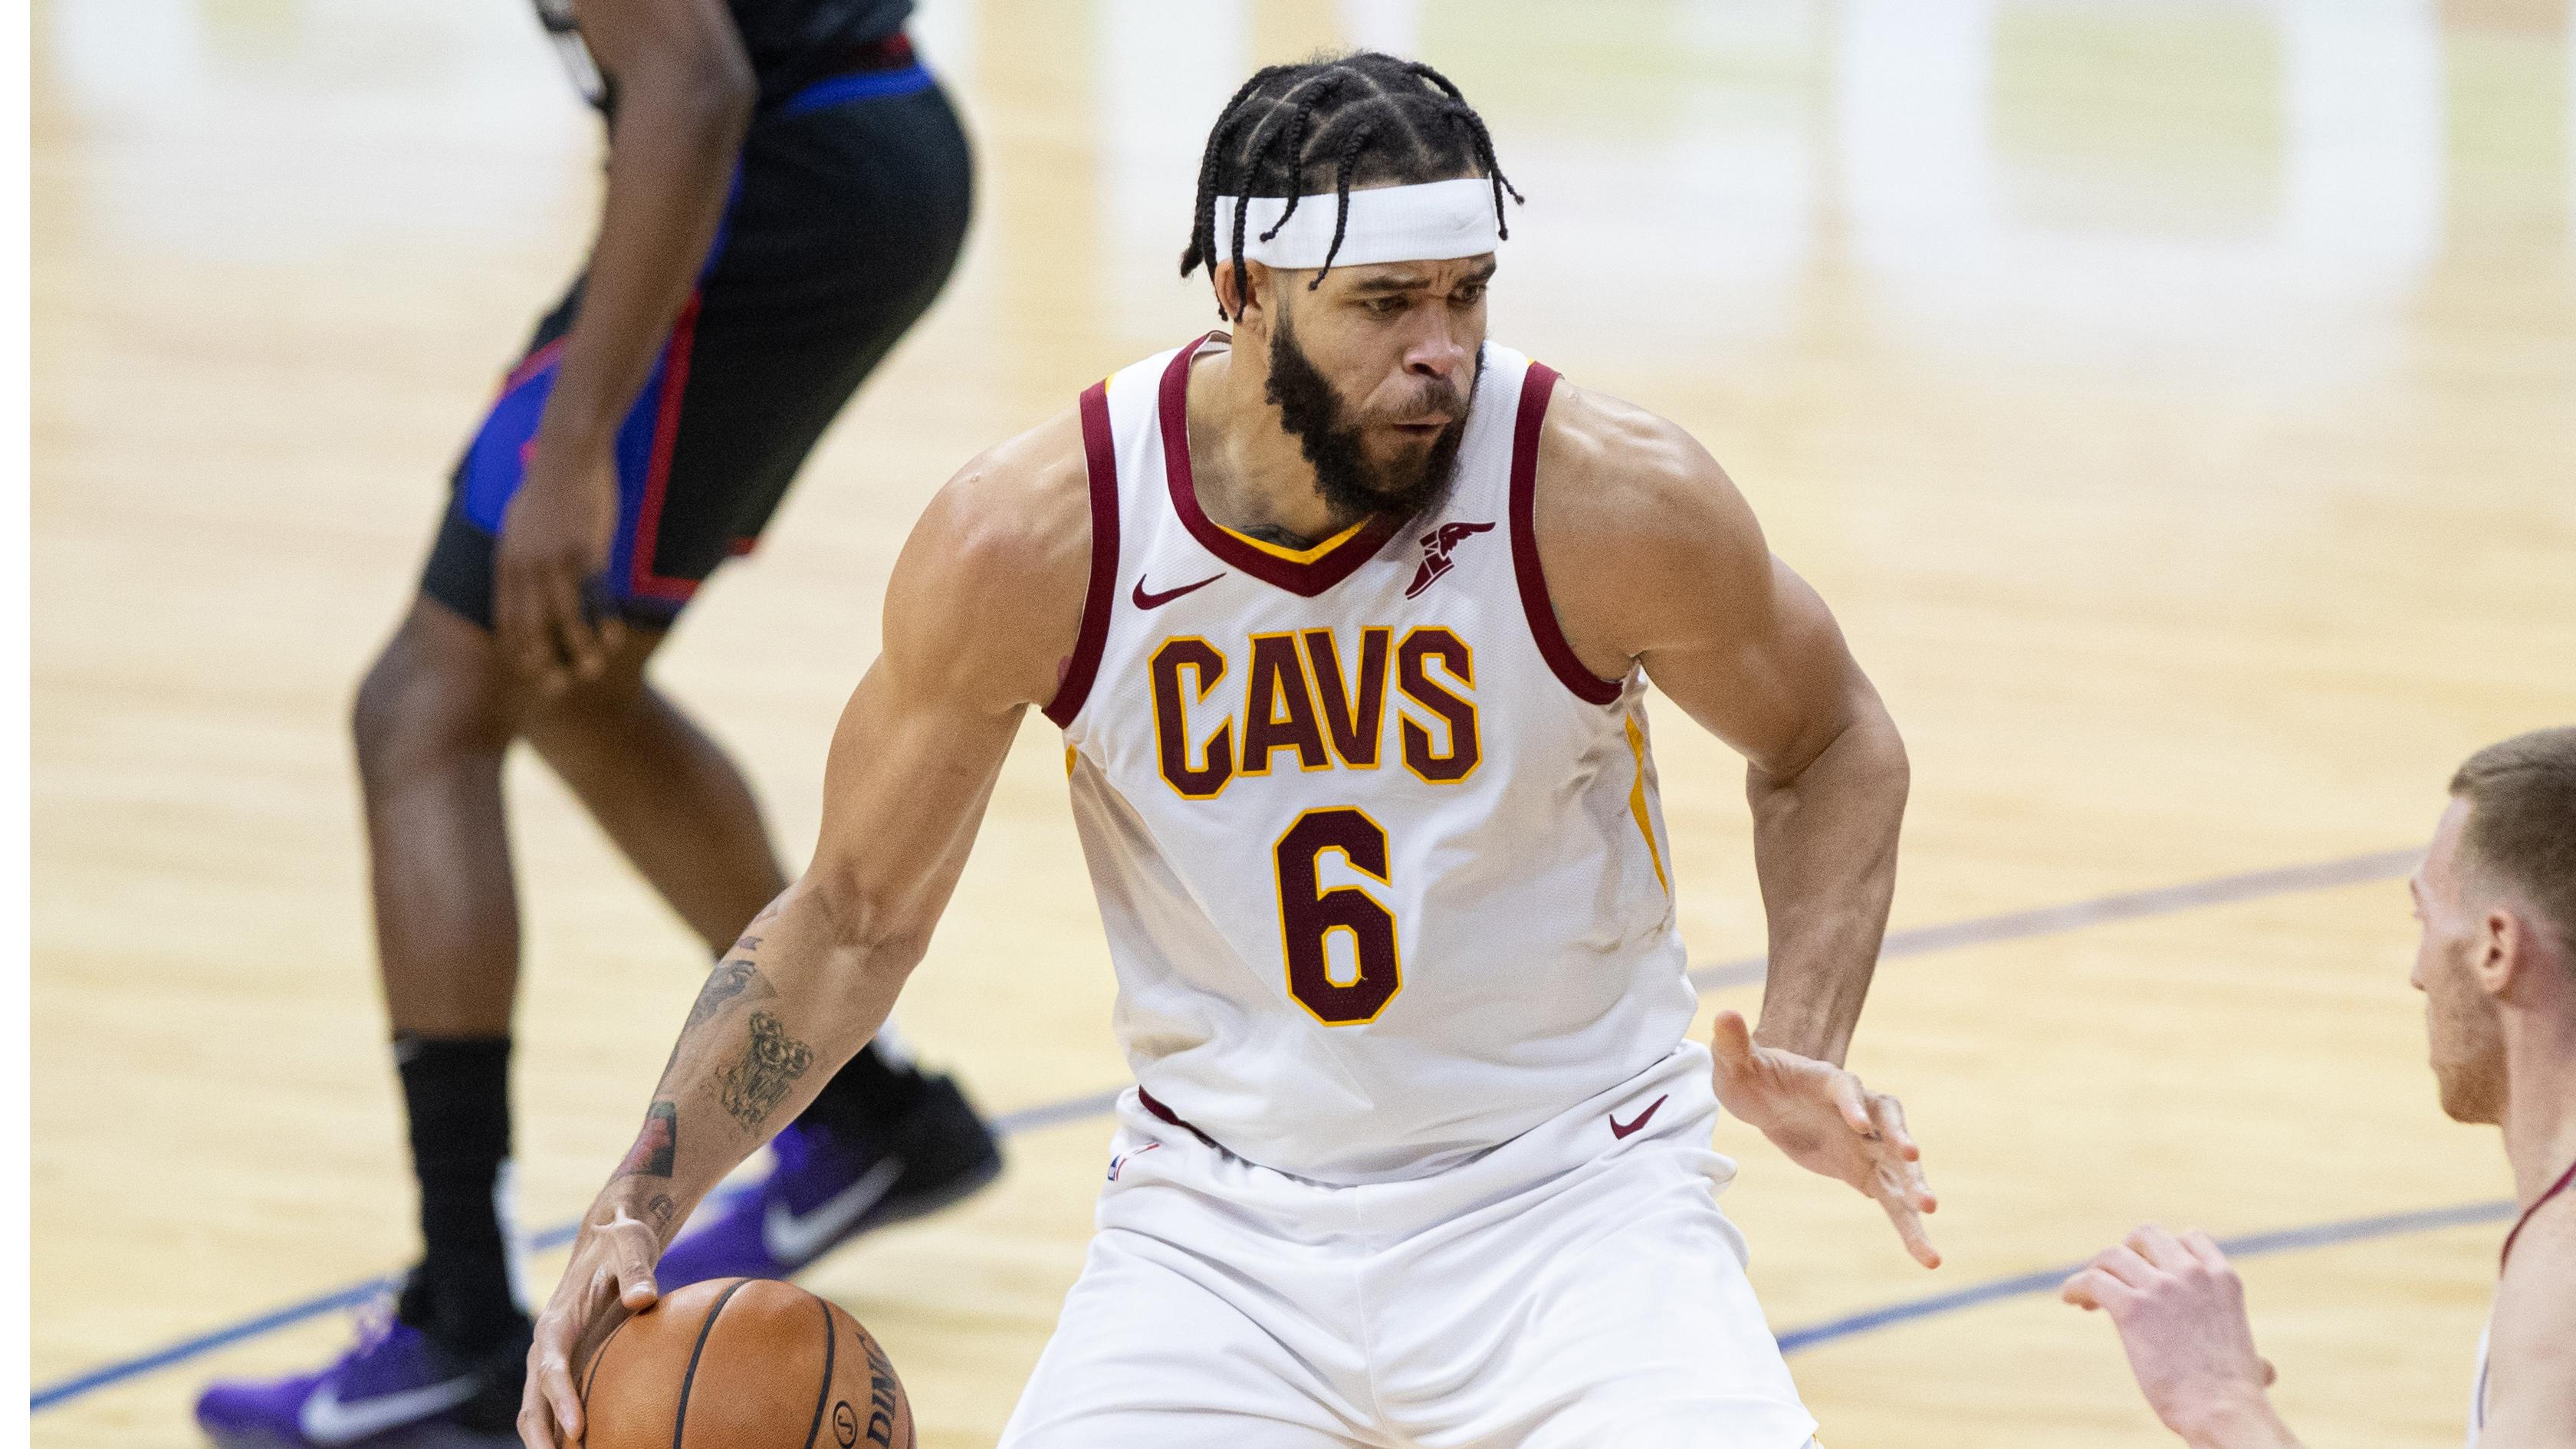 Feb 27, 2021; Philadelphia, Pennsylvania, USA; Cleveland Cavaliers center JaVale McGee (6) dribbles the ball against the Philadelphia 76ers during the first quarter at Wells Fargo Center. / Bill Streicher-USA TODAY Sports